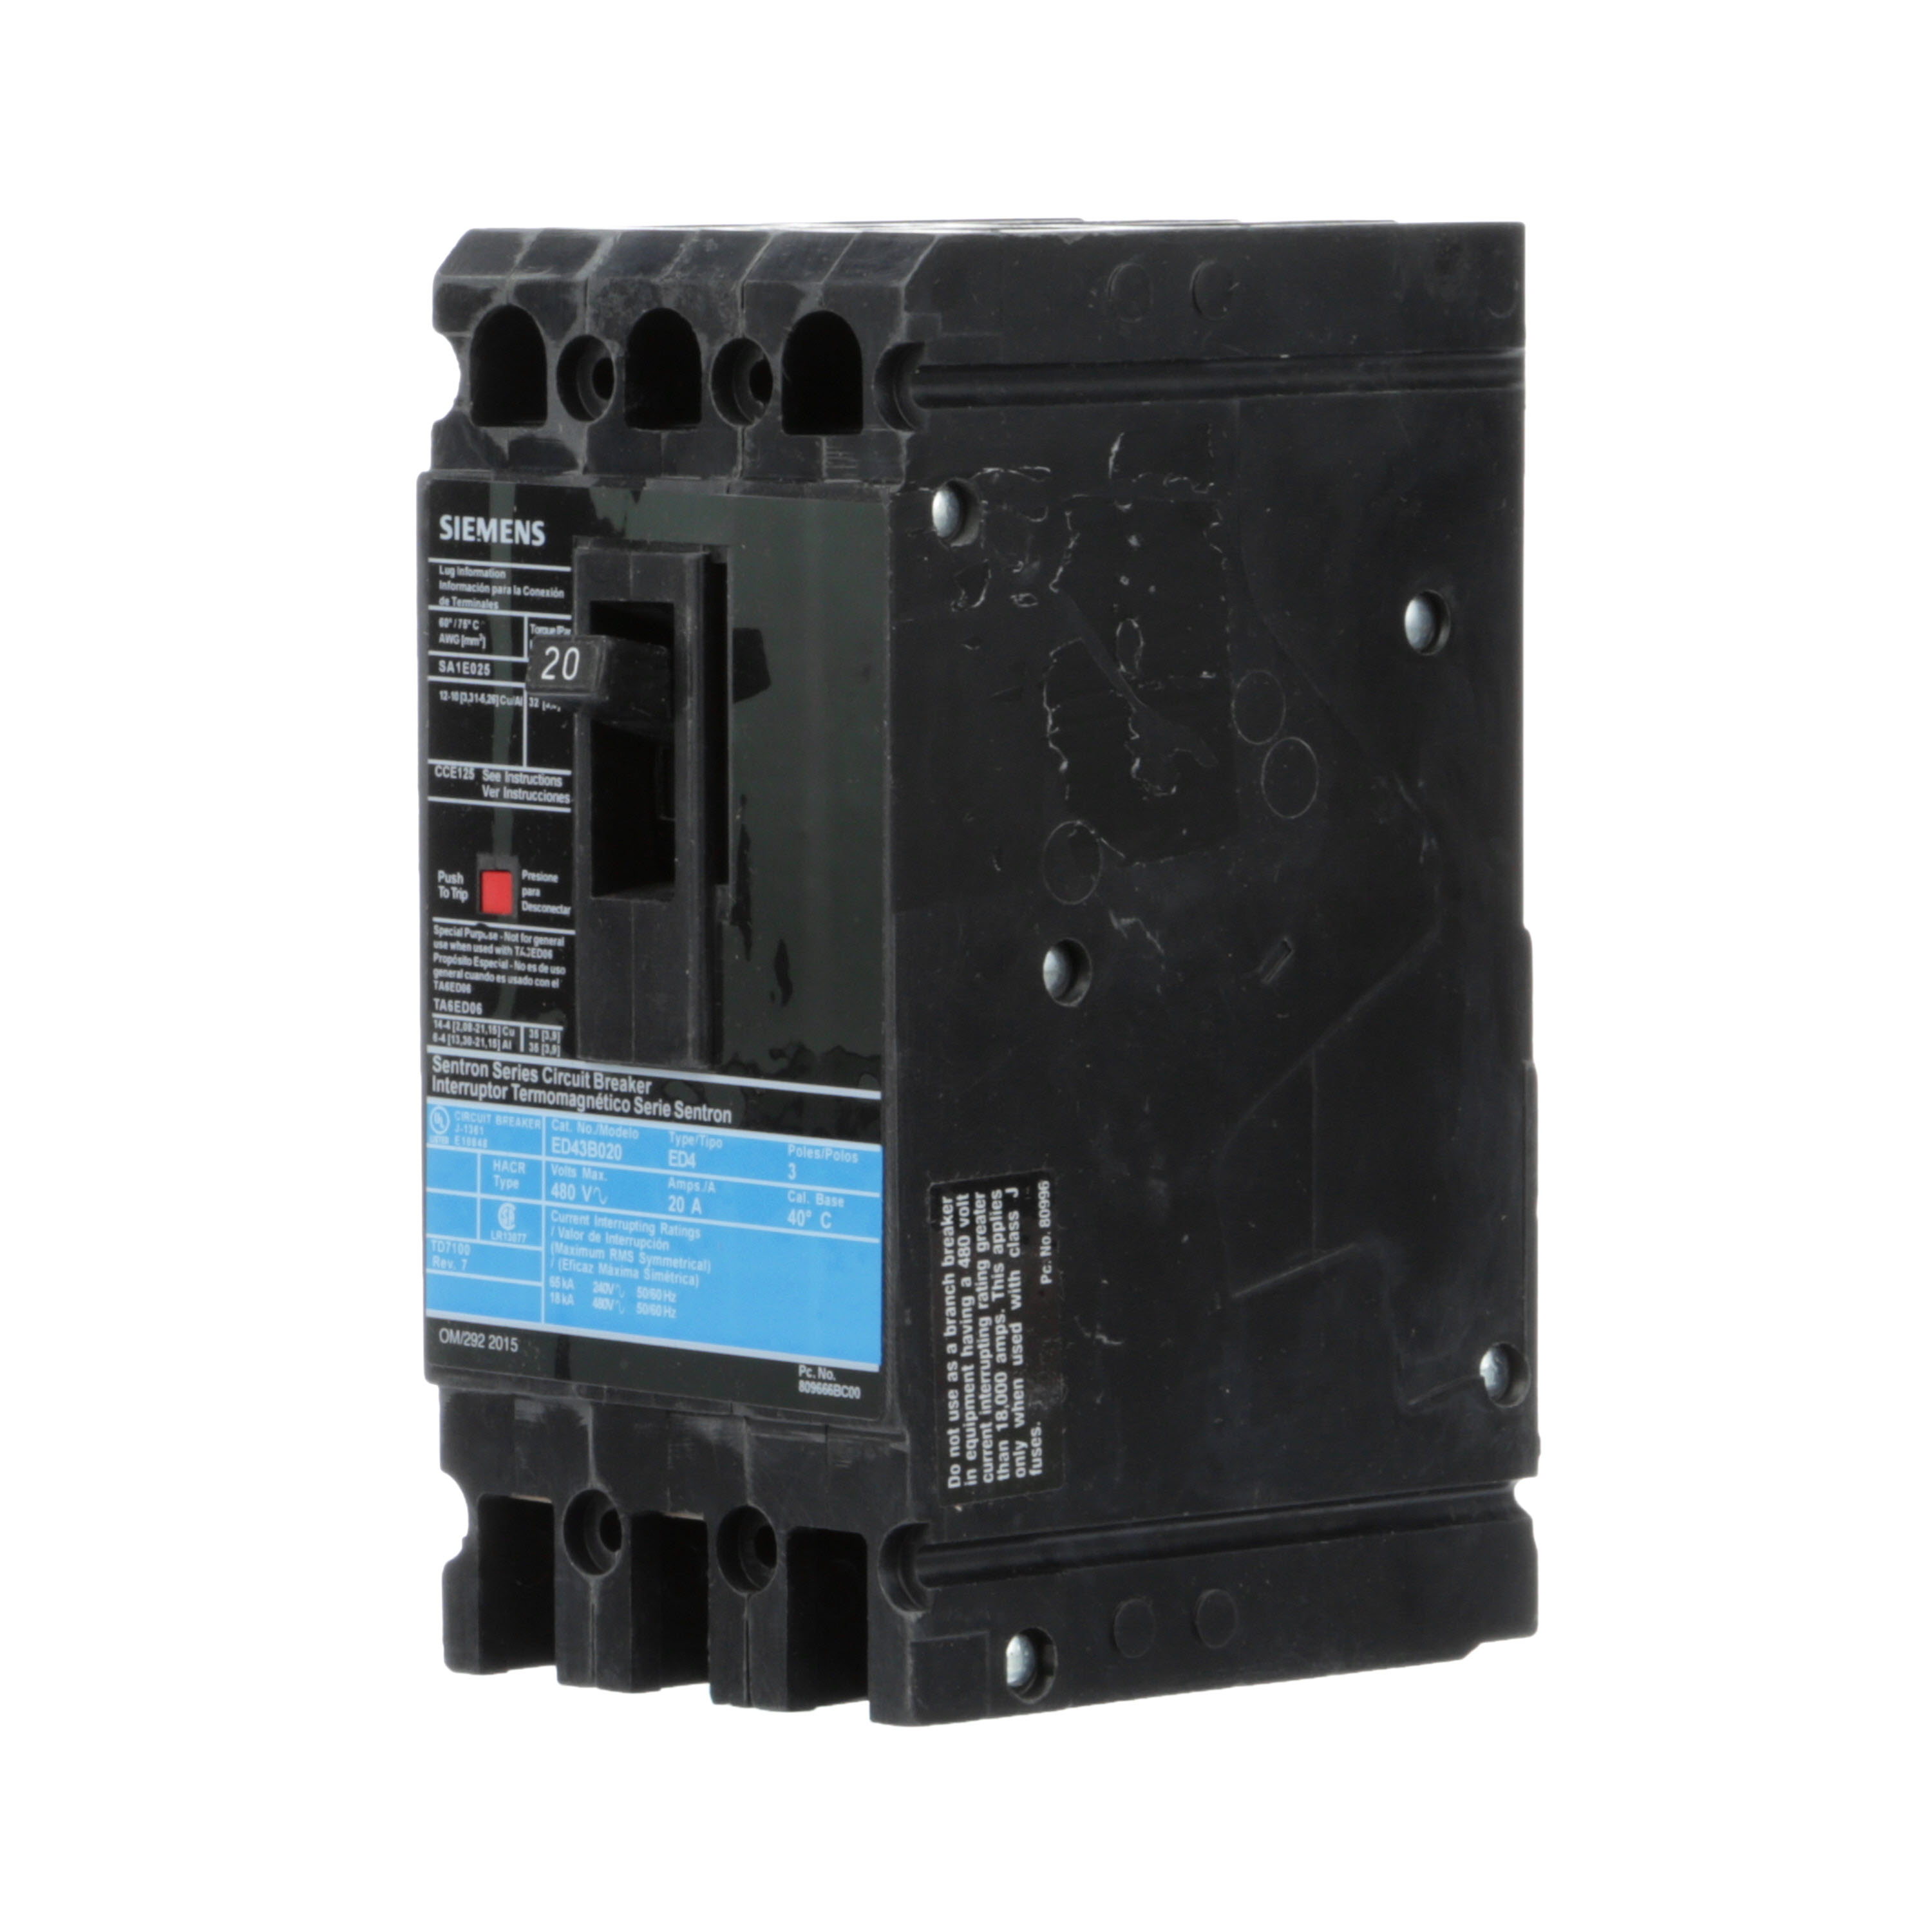 SIEMENS LOW VOLTAGE SENTRON MOLDED CASE CIRCUIT BREAKER WITH THERMAL - MAGNETICTRIP UNIT. STANDARD 40 DEG C BREAKER ED FRAME WITH STANDARD BREAKING CAPACITY. 20A 3-POLE (18KAIC AT 480V). NON-INTERCHANGEABLE TRIP UNIT. SPECIAL FEATURES LINE AND LOAD SIDE LUGS (SA1E025) WIRE RANGE 14 - 10AWG (CU) / 12 - 10AWG (AL). DIMENSIONS (W x H x D) IN 3.00 x 6.4 x 3.92.